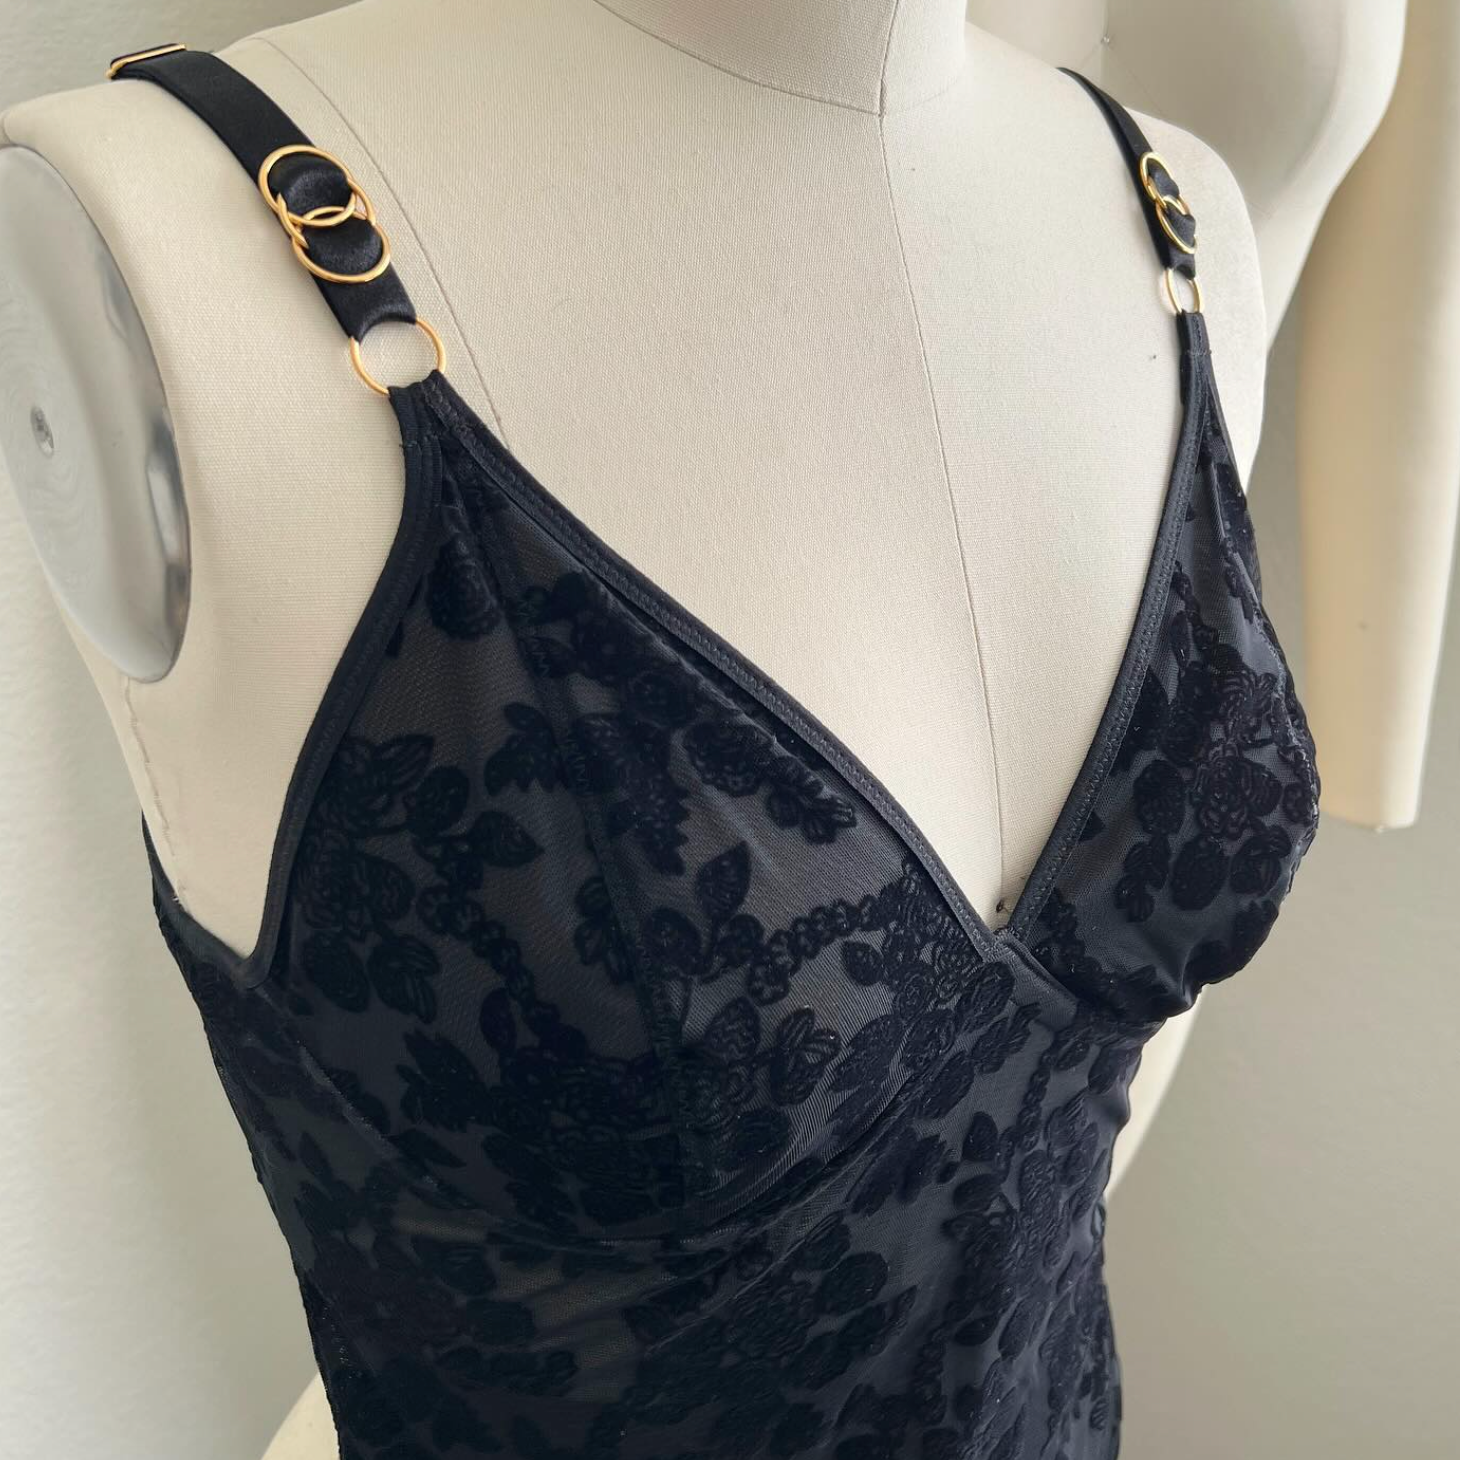 Rubies Custom Bras: Custom Bodysuit in Black Velvet Mesh Front Shot. Made to measure and made to order. Available in various colours and fabrics. Bespoke and made in Canada and the USA by bra design experts.